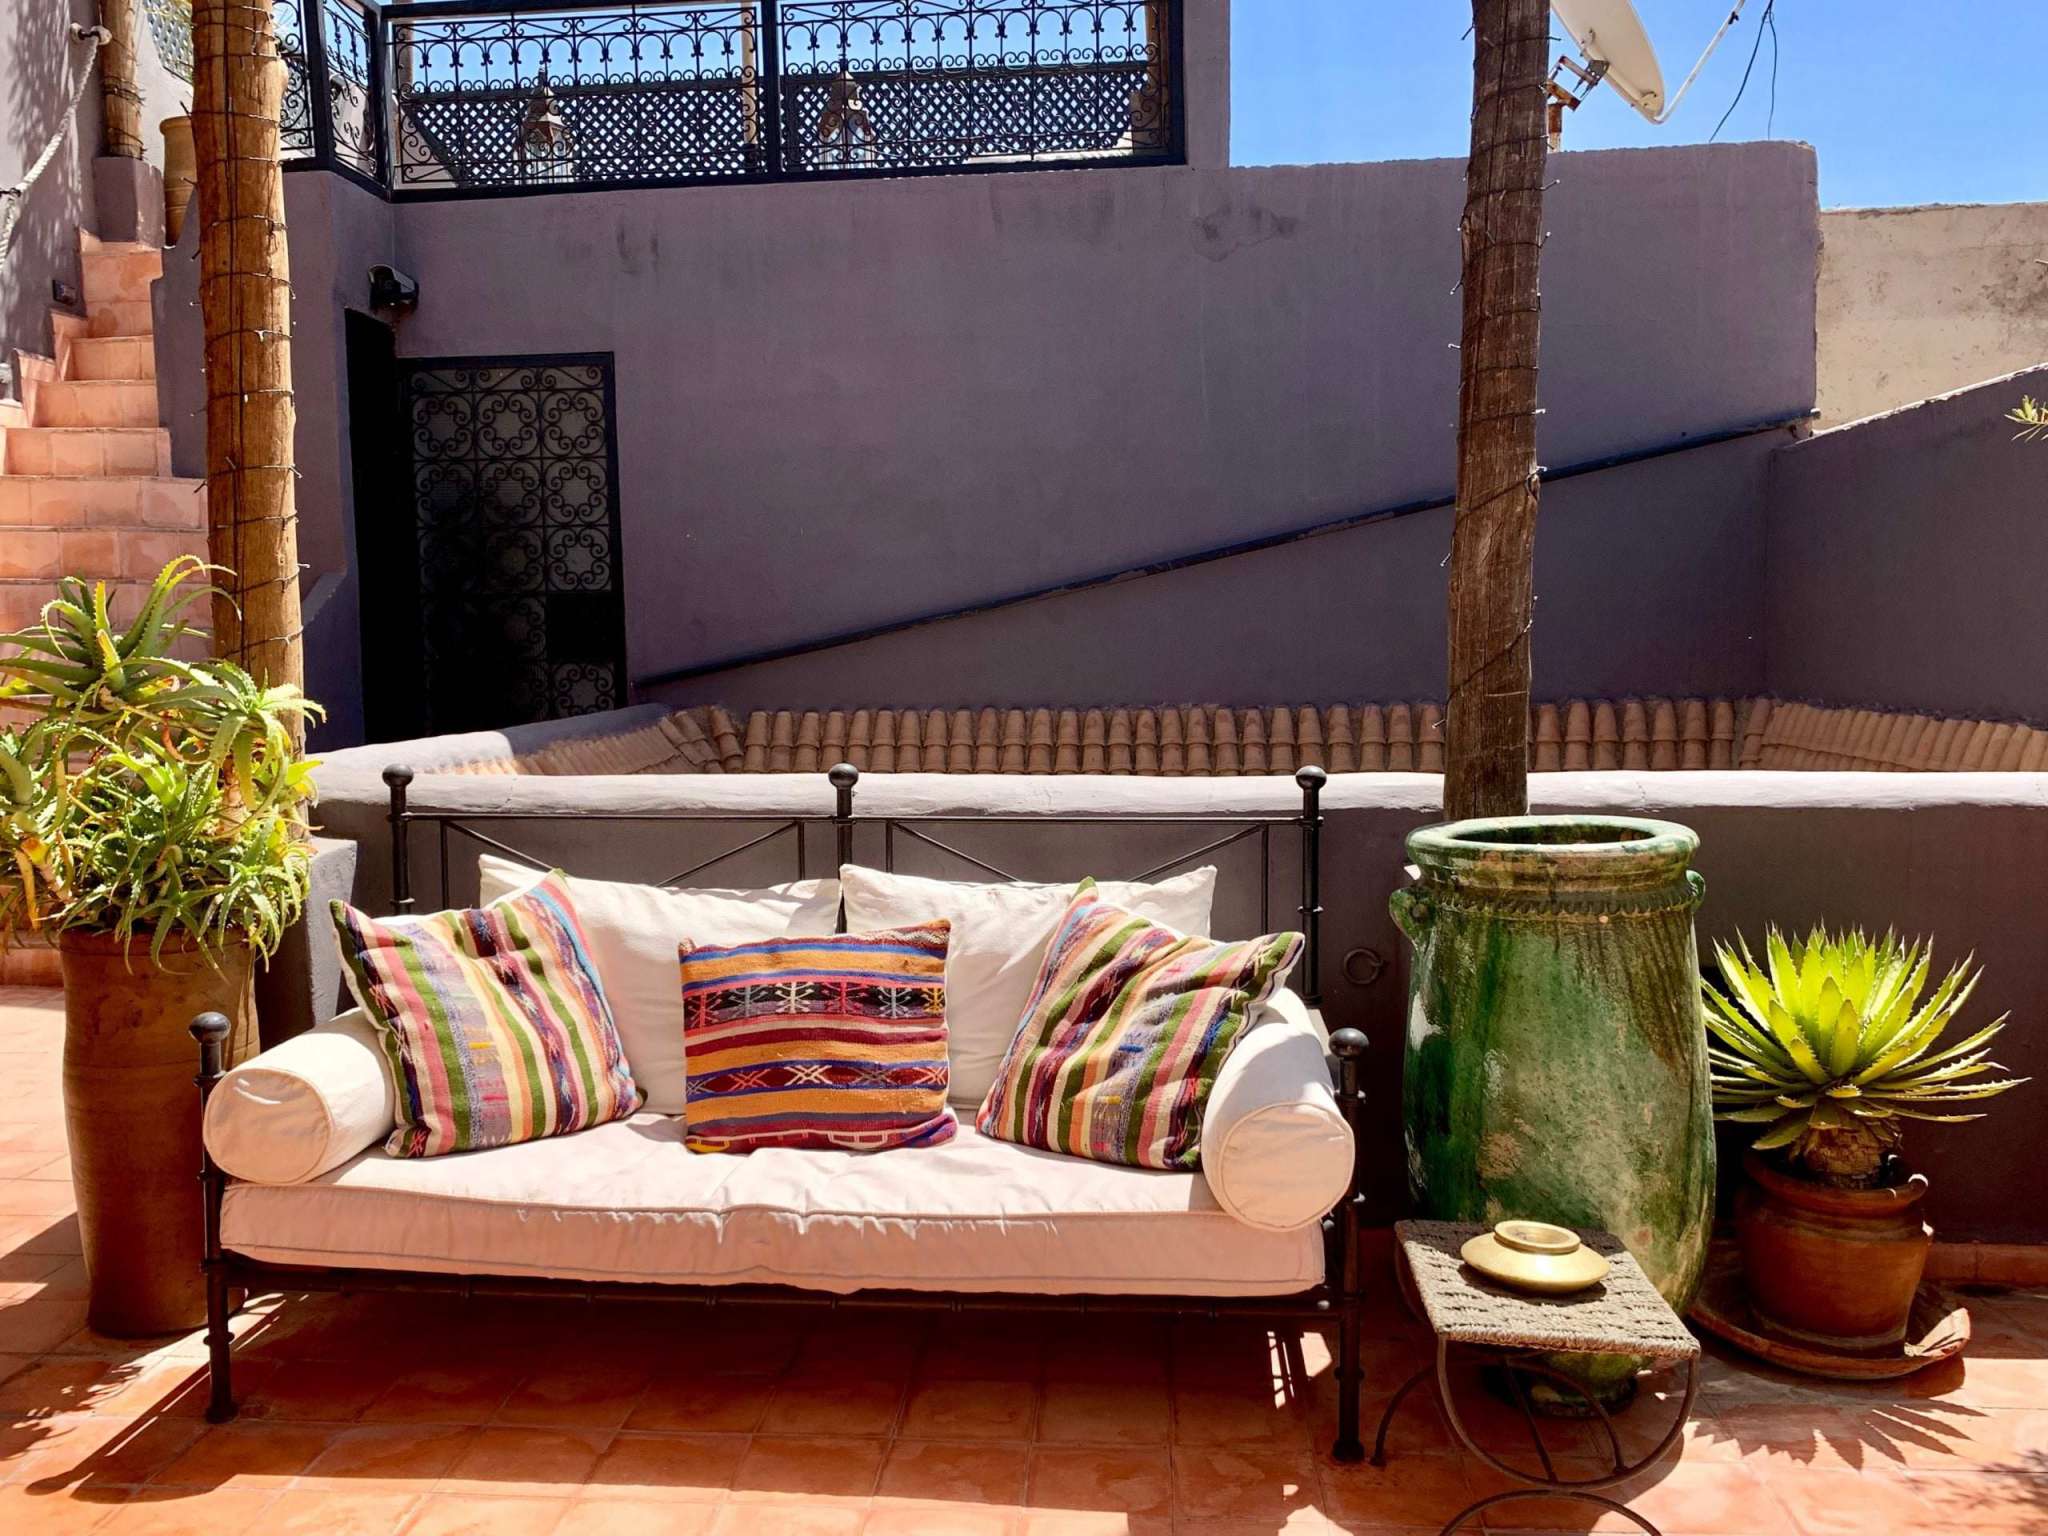 Luxury-in-the-medina-of-marrakech---riad-timila-review-feature.